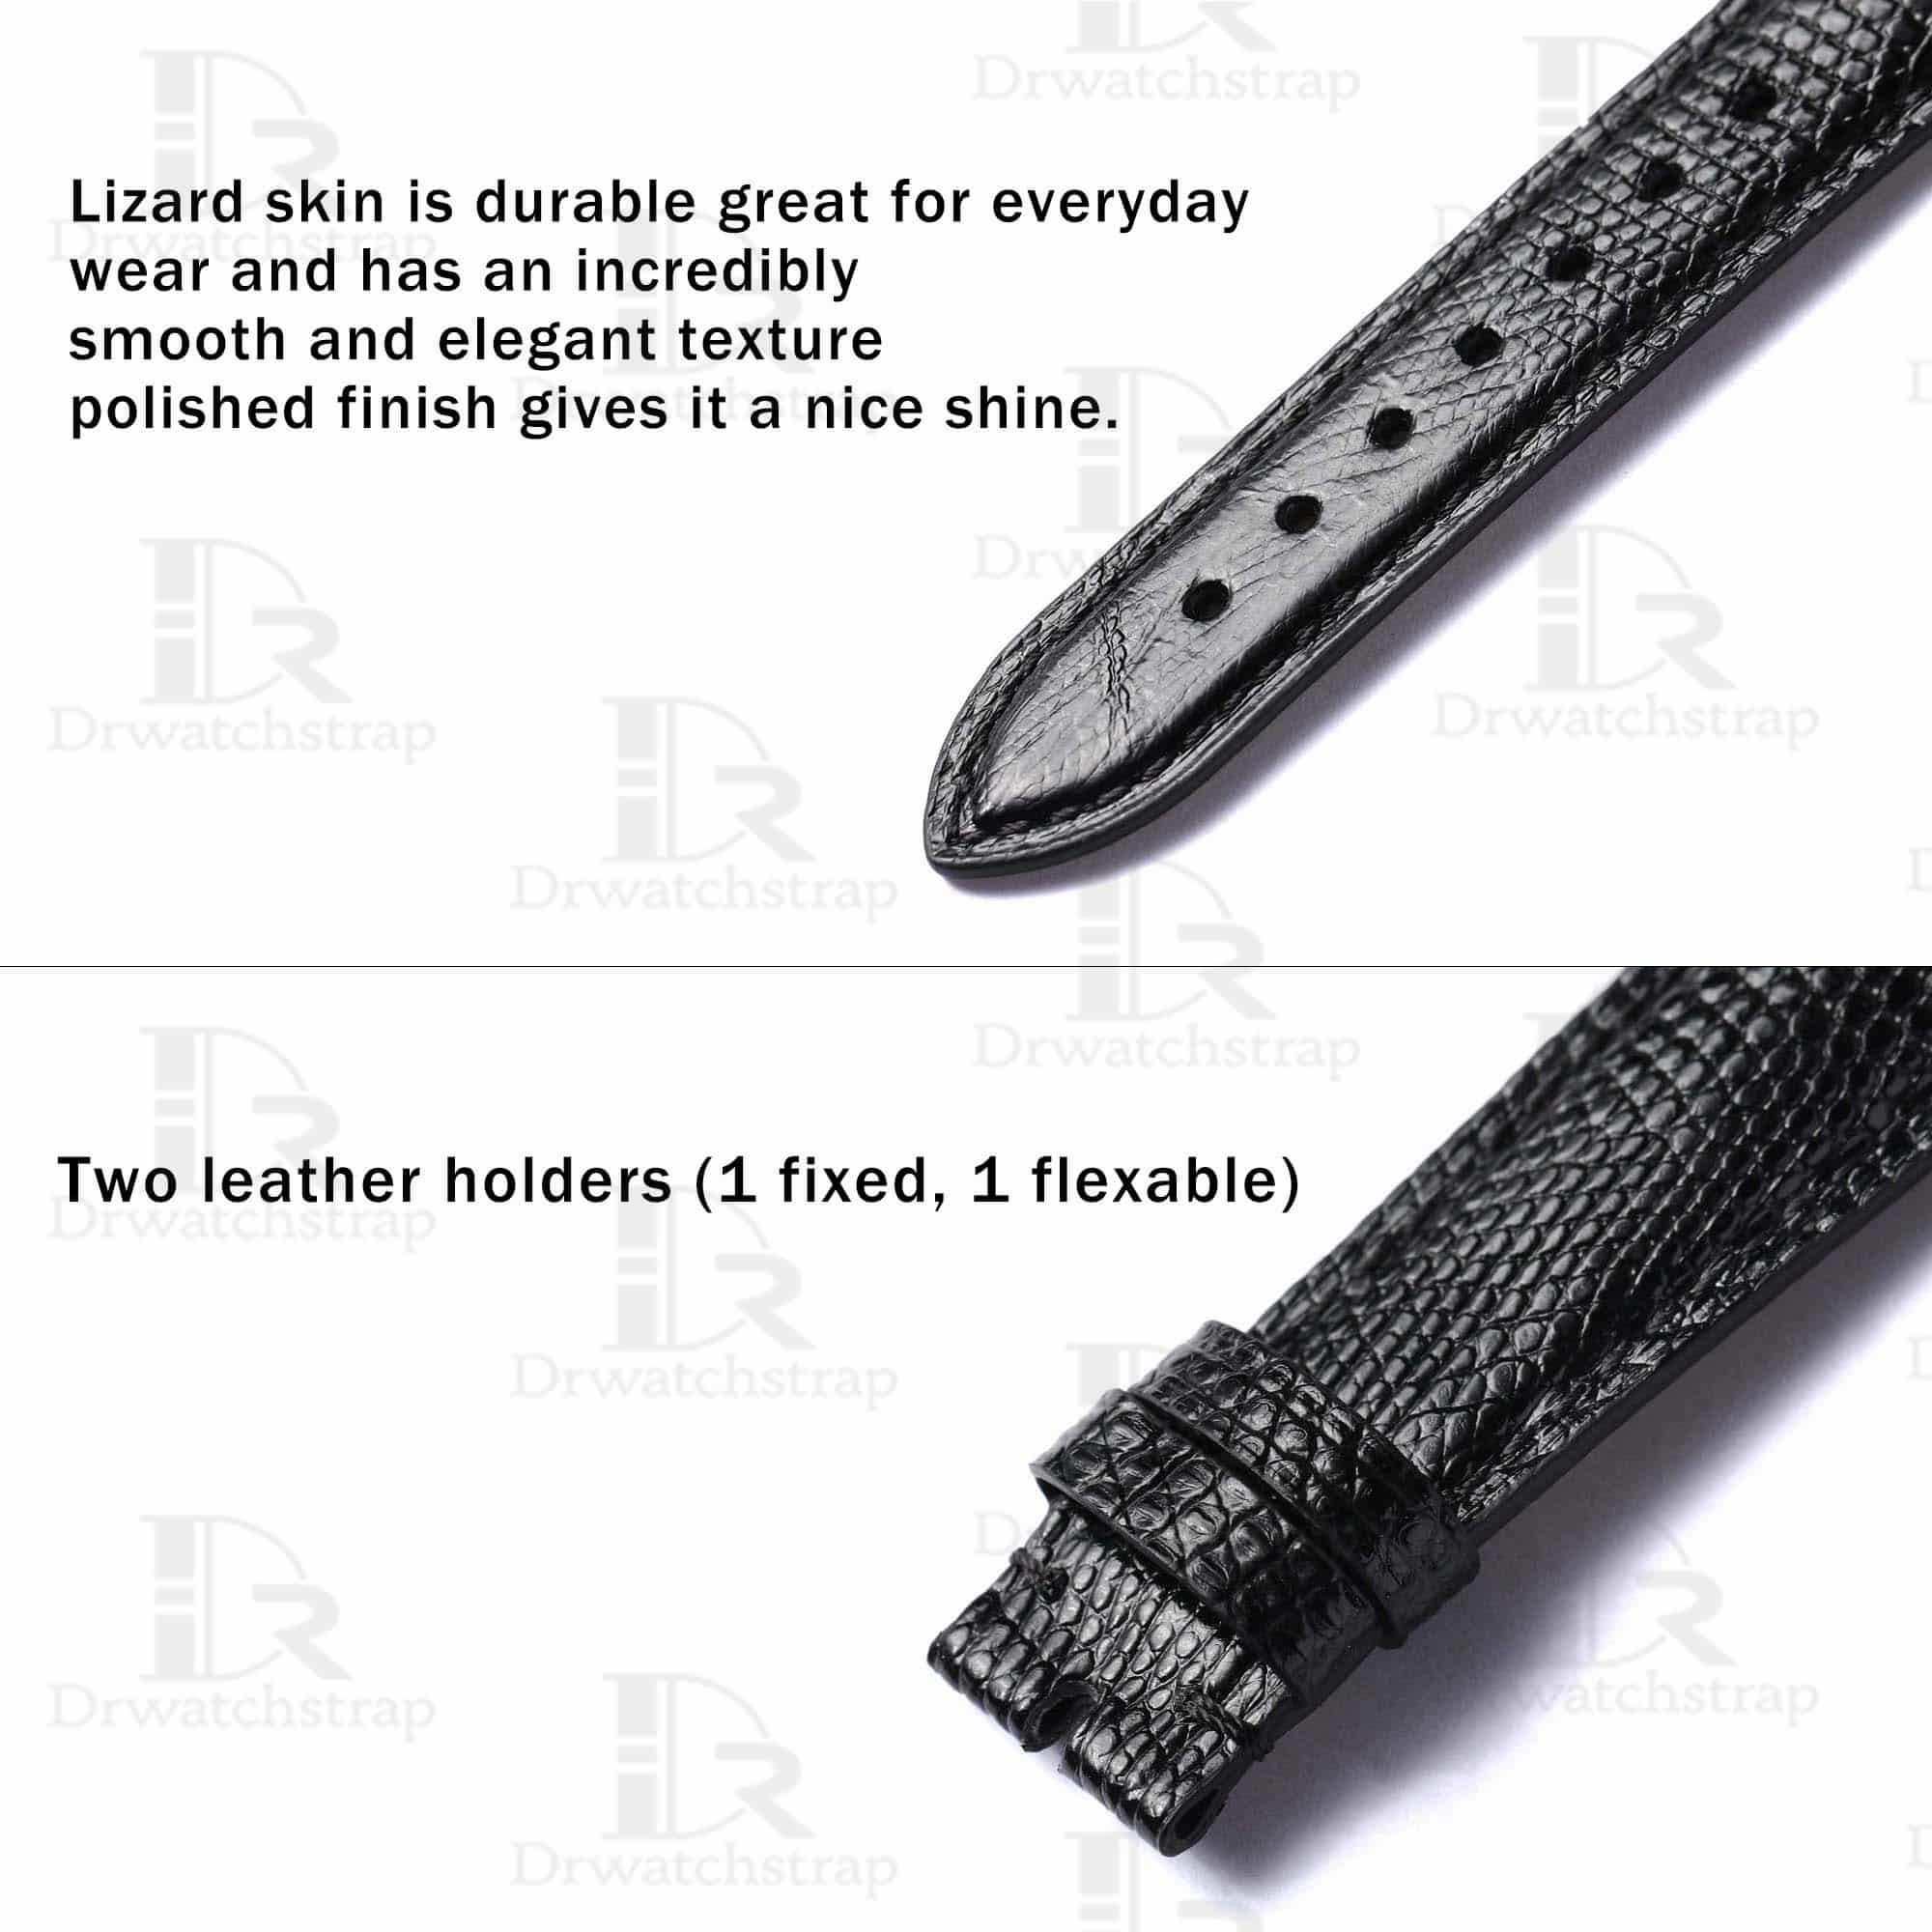 Shop the genuine best quality lizard skinleather material Black 20mm custom Rolex straps & watch bands replacement for Rolex luxury watches from DR watchstrap for sale at a low price - shop the premium Grade A leather watch strap and watchband online at a discount price